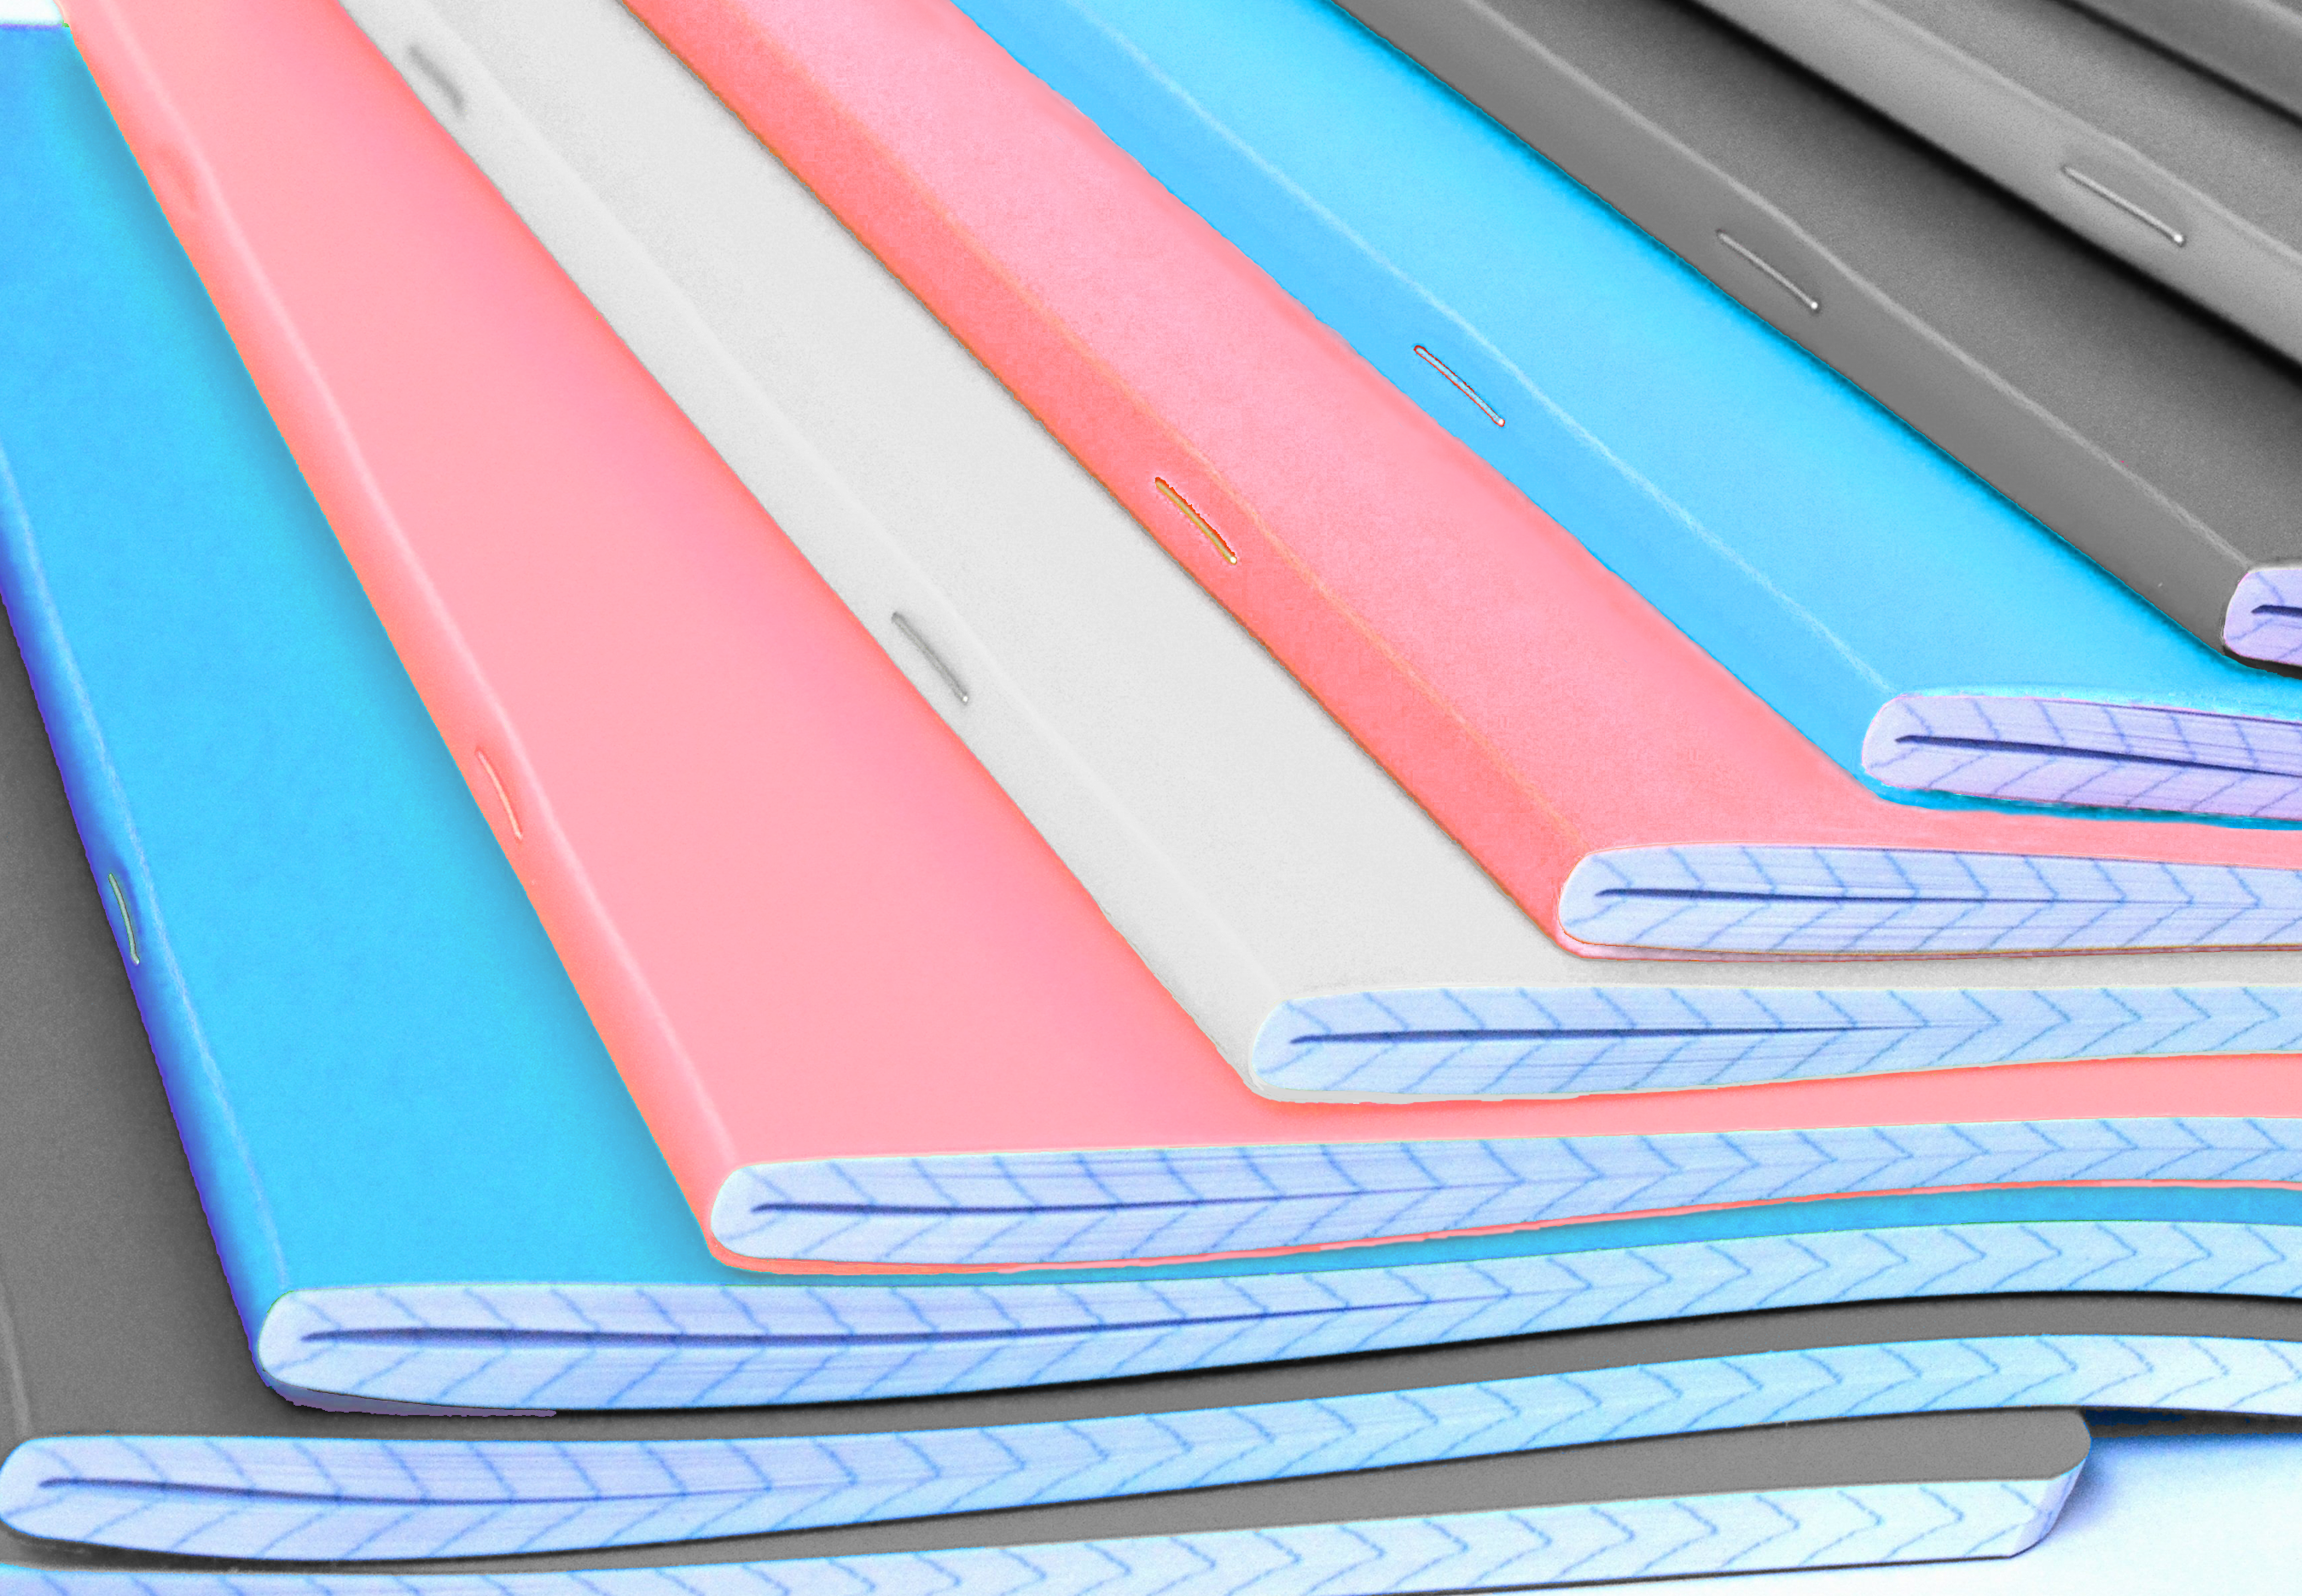 Stack of journals fanned out in the trans flag colors, blue, pink, and white.